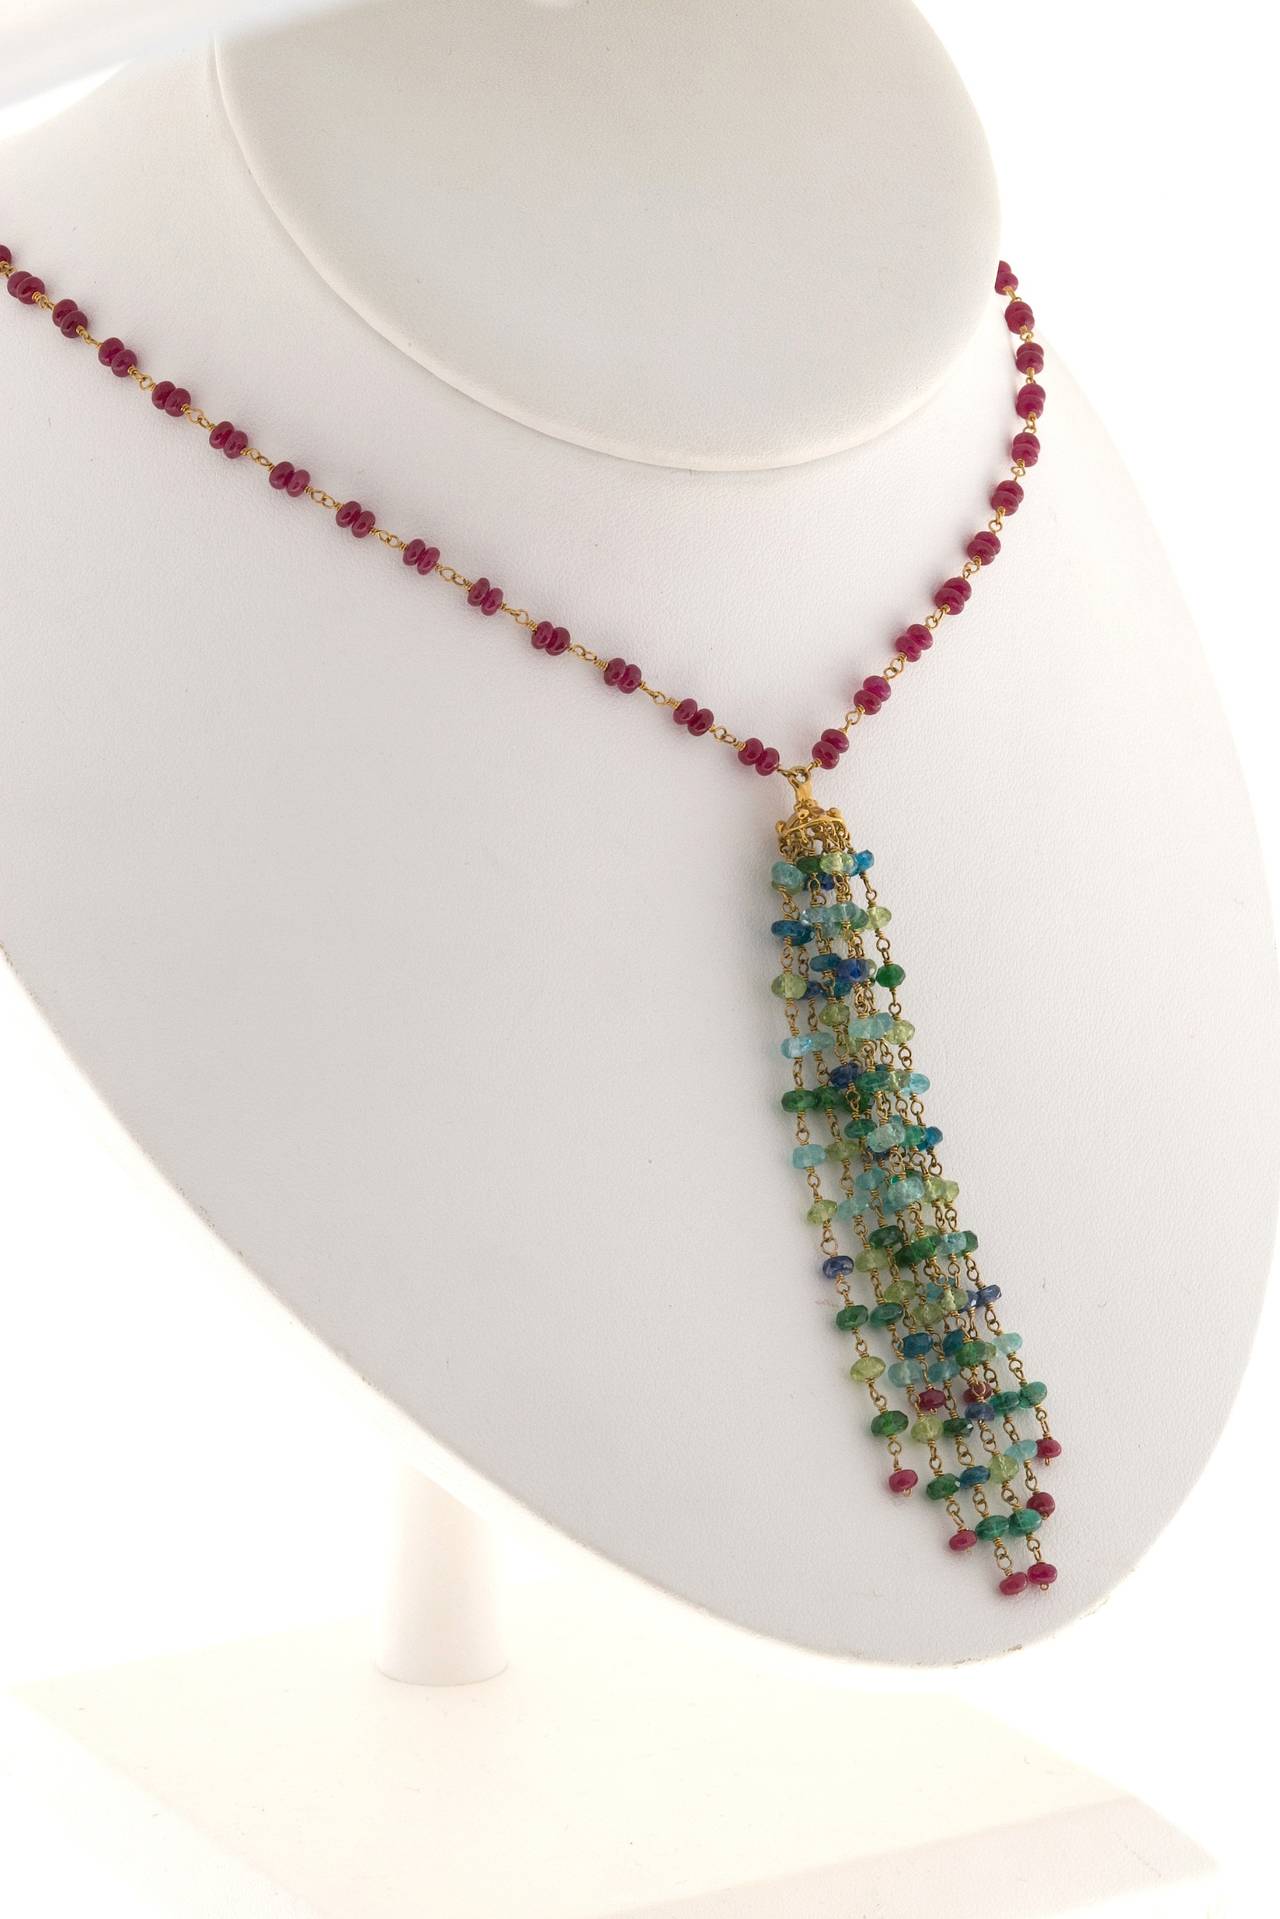 Women's Ruby Aqua Apatite Emerald Peridot Hand Wired Rondell Bead Pendant Necklace For Sale